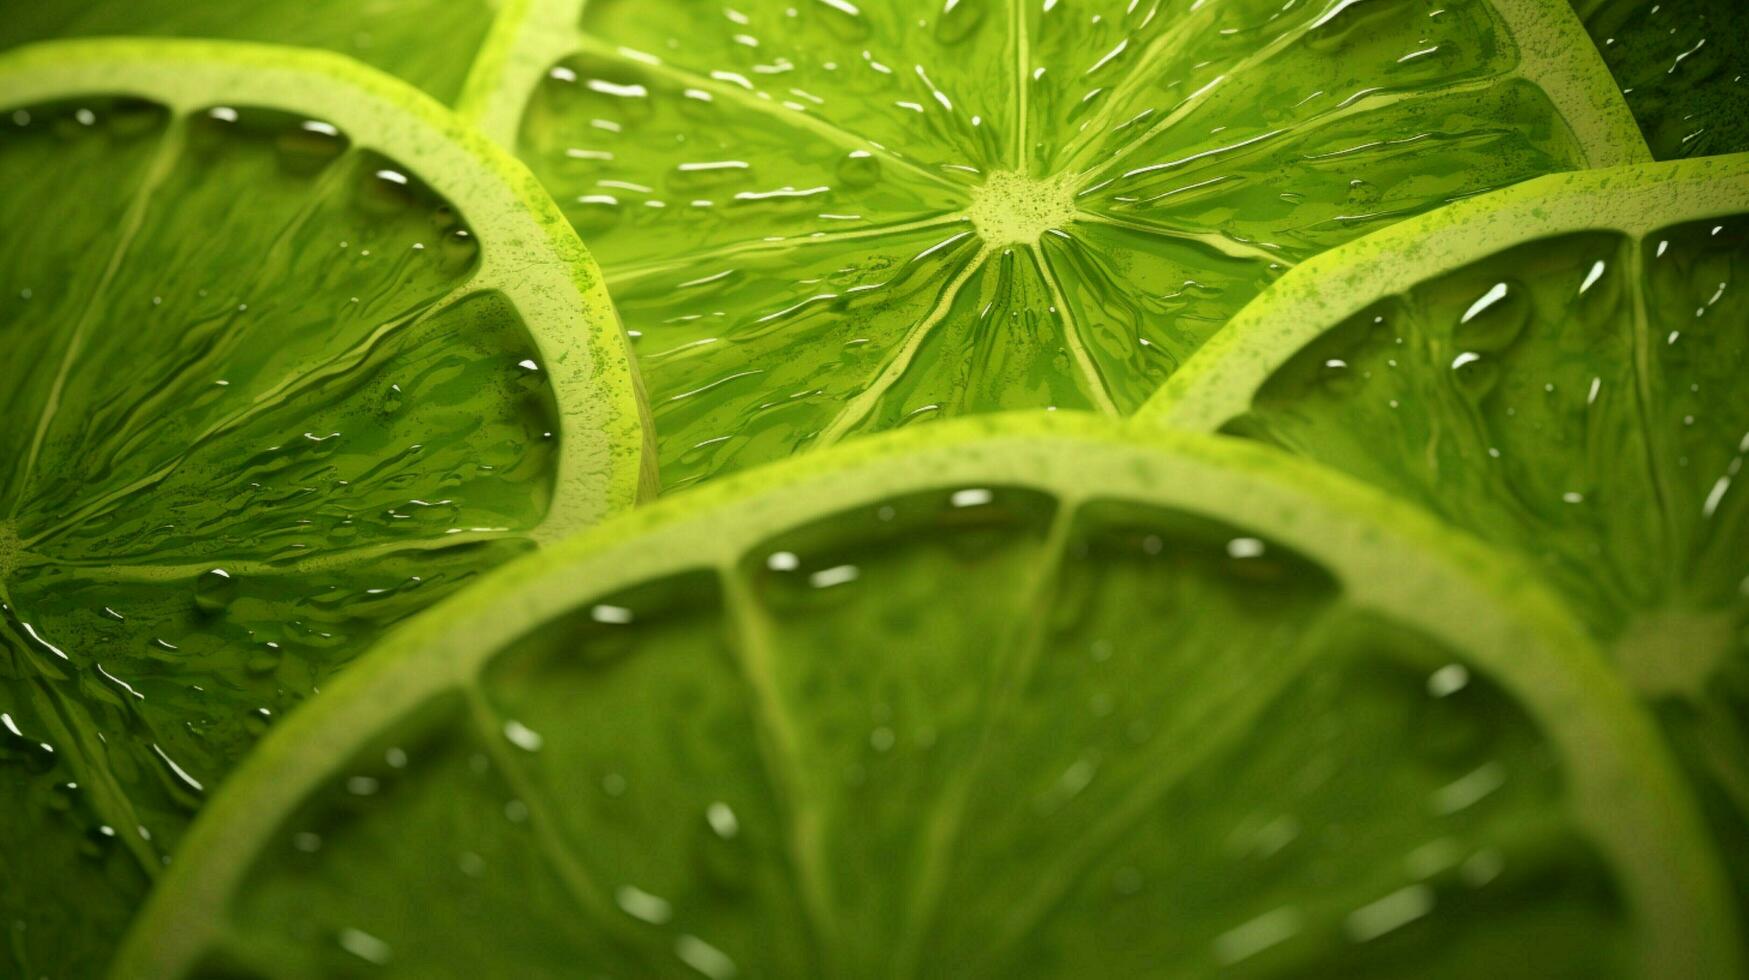 lime texture high quality photo